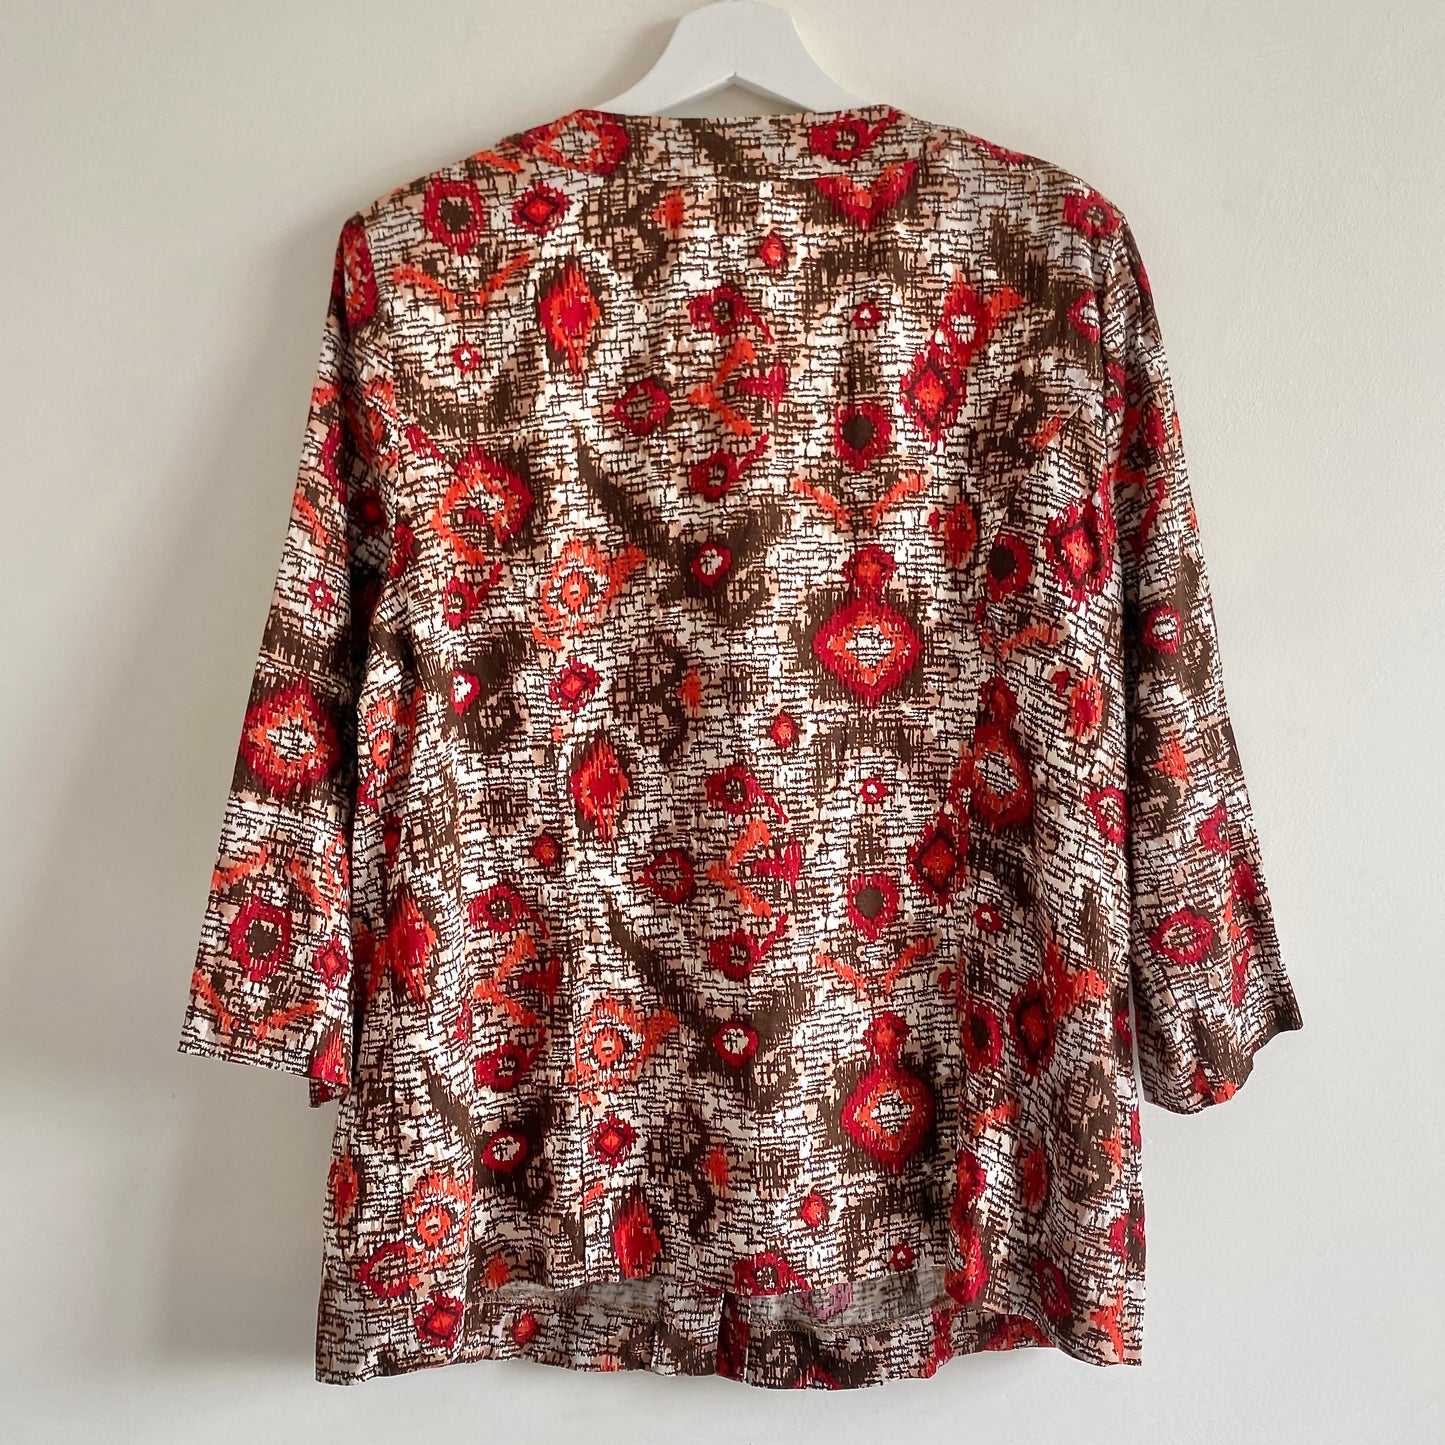 Red & Brown 80s Top Was £34